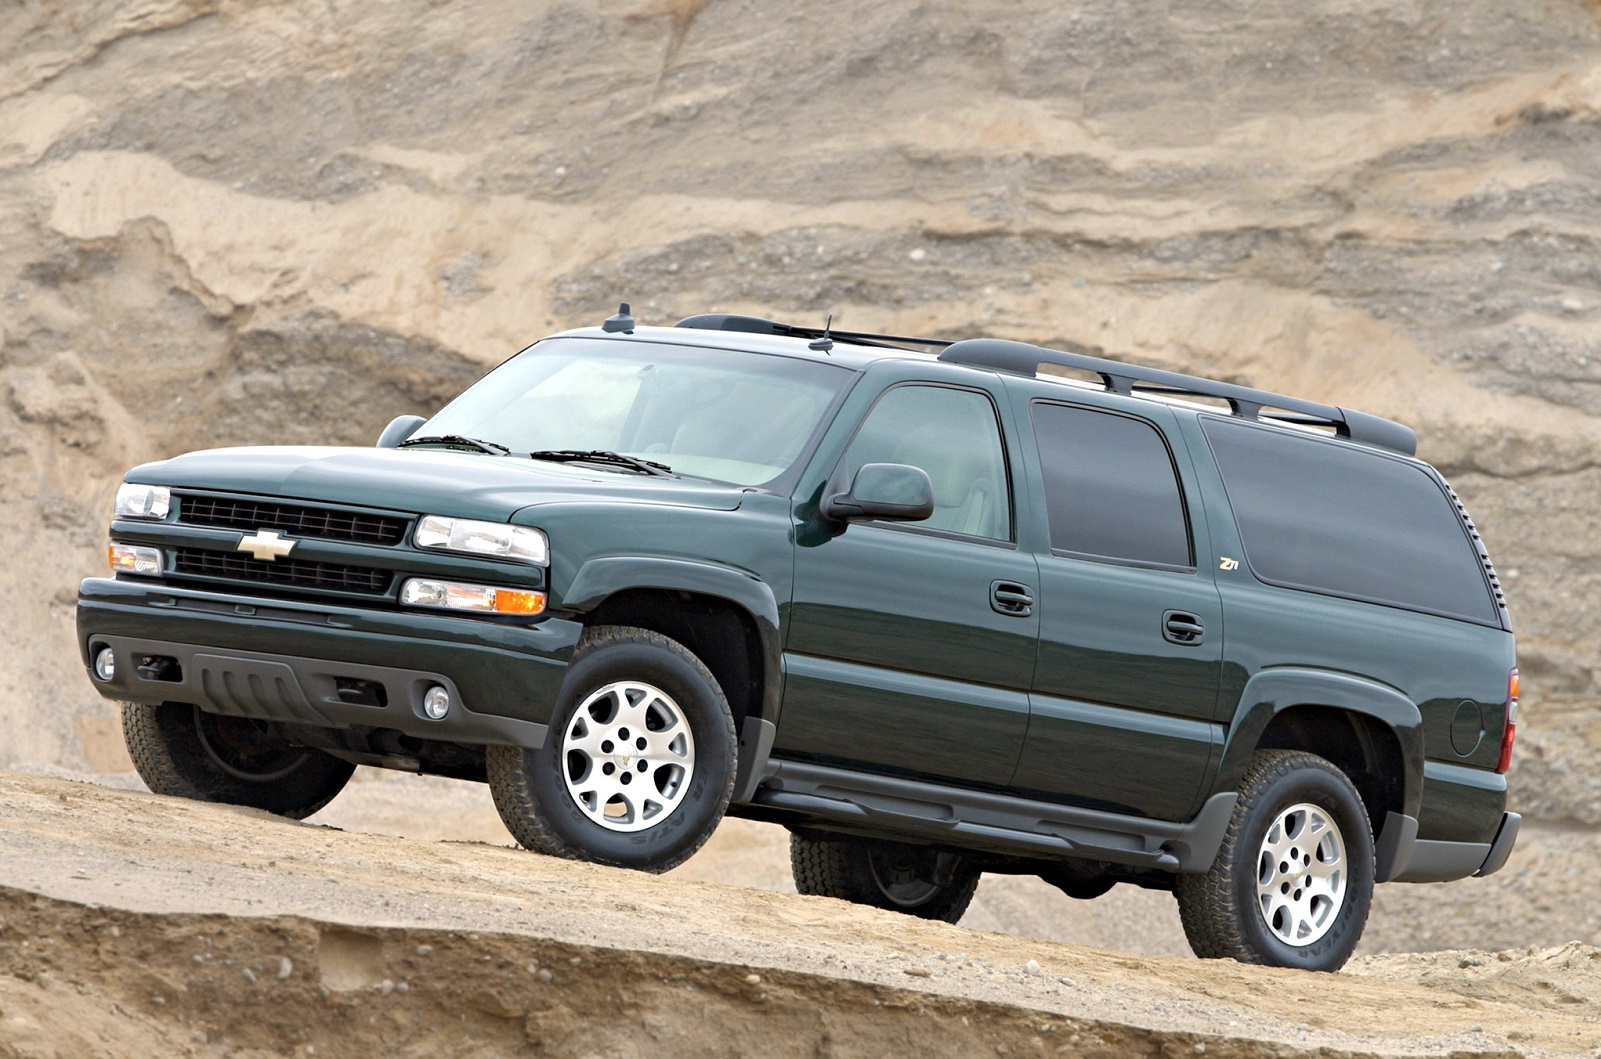 <p>When you have one of the biggest <strong>SUVs</strong> to haul around, a big engine is a must and the Chevrolet Suburban has been <strong>no</strong> <strong>stranger</strong> to large motors. The biggest of all is the 8.1-liter Vortec V8, or L18 in Chevy-speak, with <strong>340 hp</strong> and only offered in the weightier 2500HD and 3500HD models.</p><p>During its six-year lifespan that started in 2001, Chevrolet also used this 8.1-liter engine in marine applications and to power a number of large <strong>motorhomes</strong> thanks to its prodigious torque of 440lb ft from low revs. However, fuel economy concerns <strong>killed</strong> it off when the 10<sup>th</sup> generation Suburban arrived in 2007.</p>